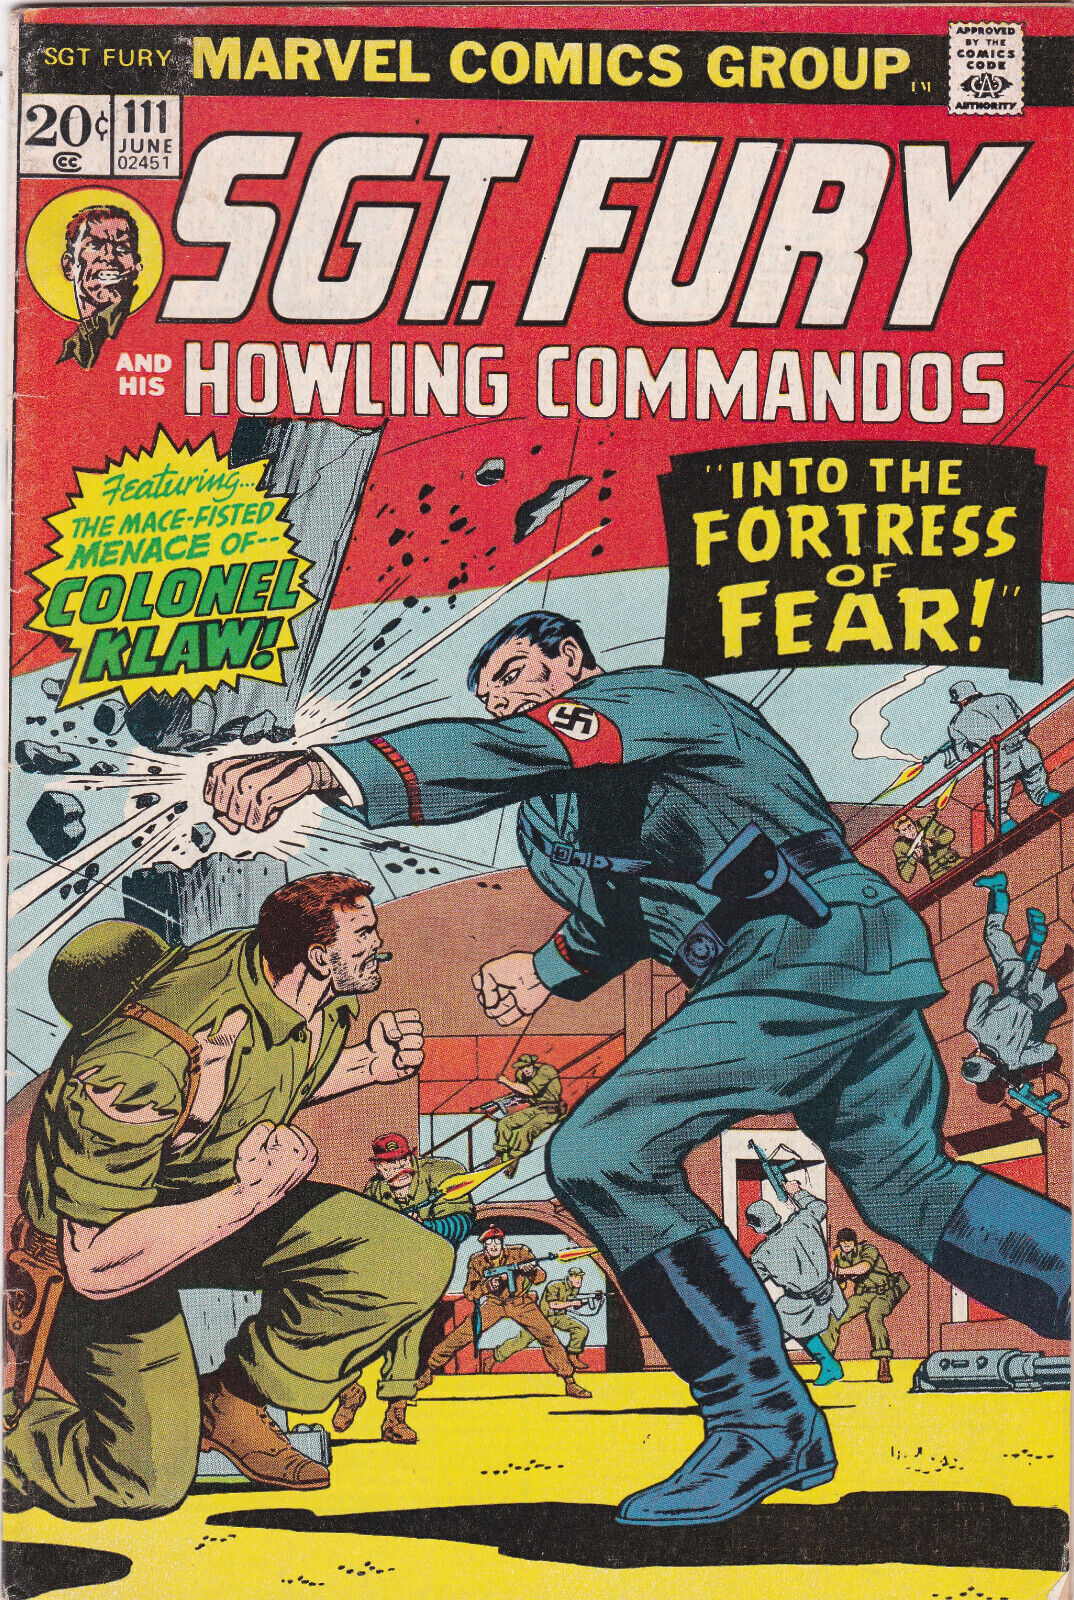 Sgt. Fury and His Howling Comandoes #111 FN